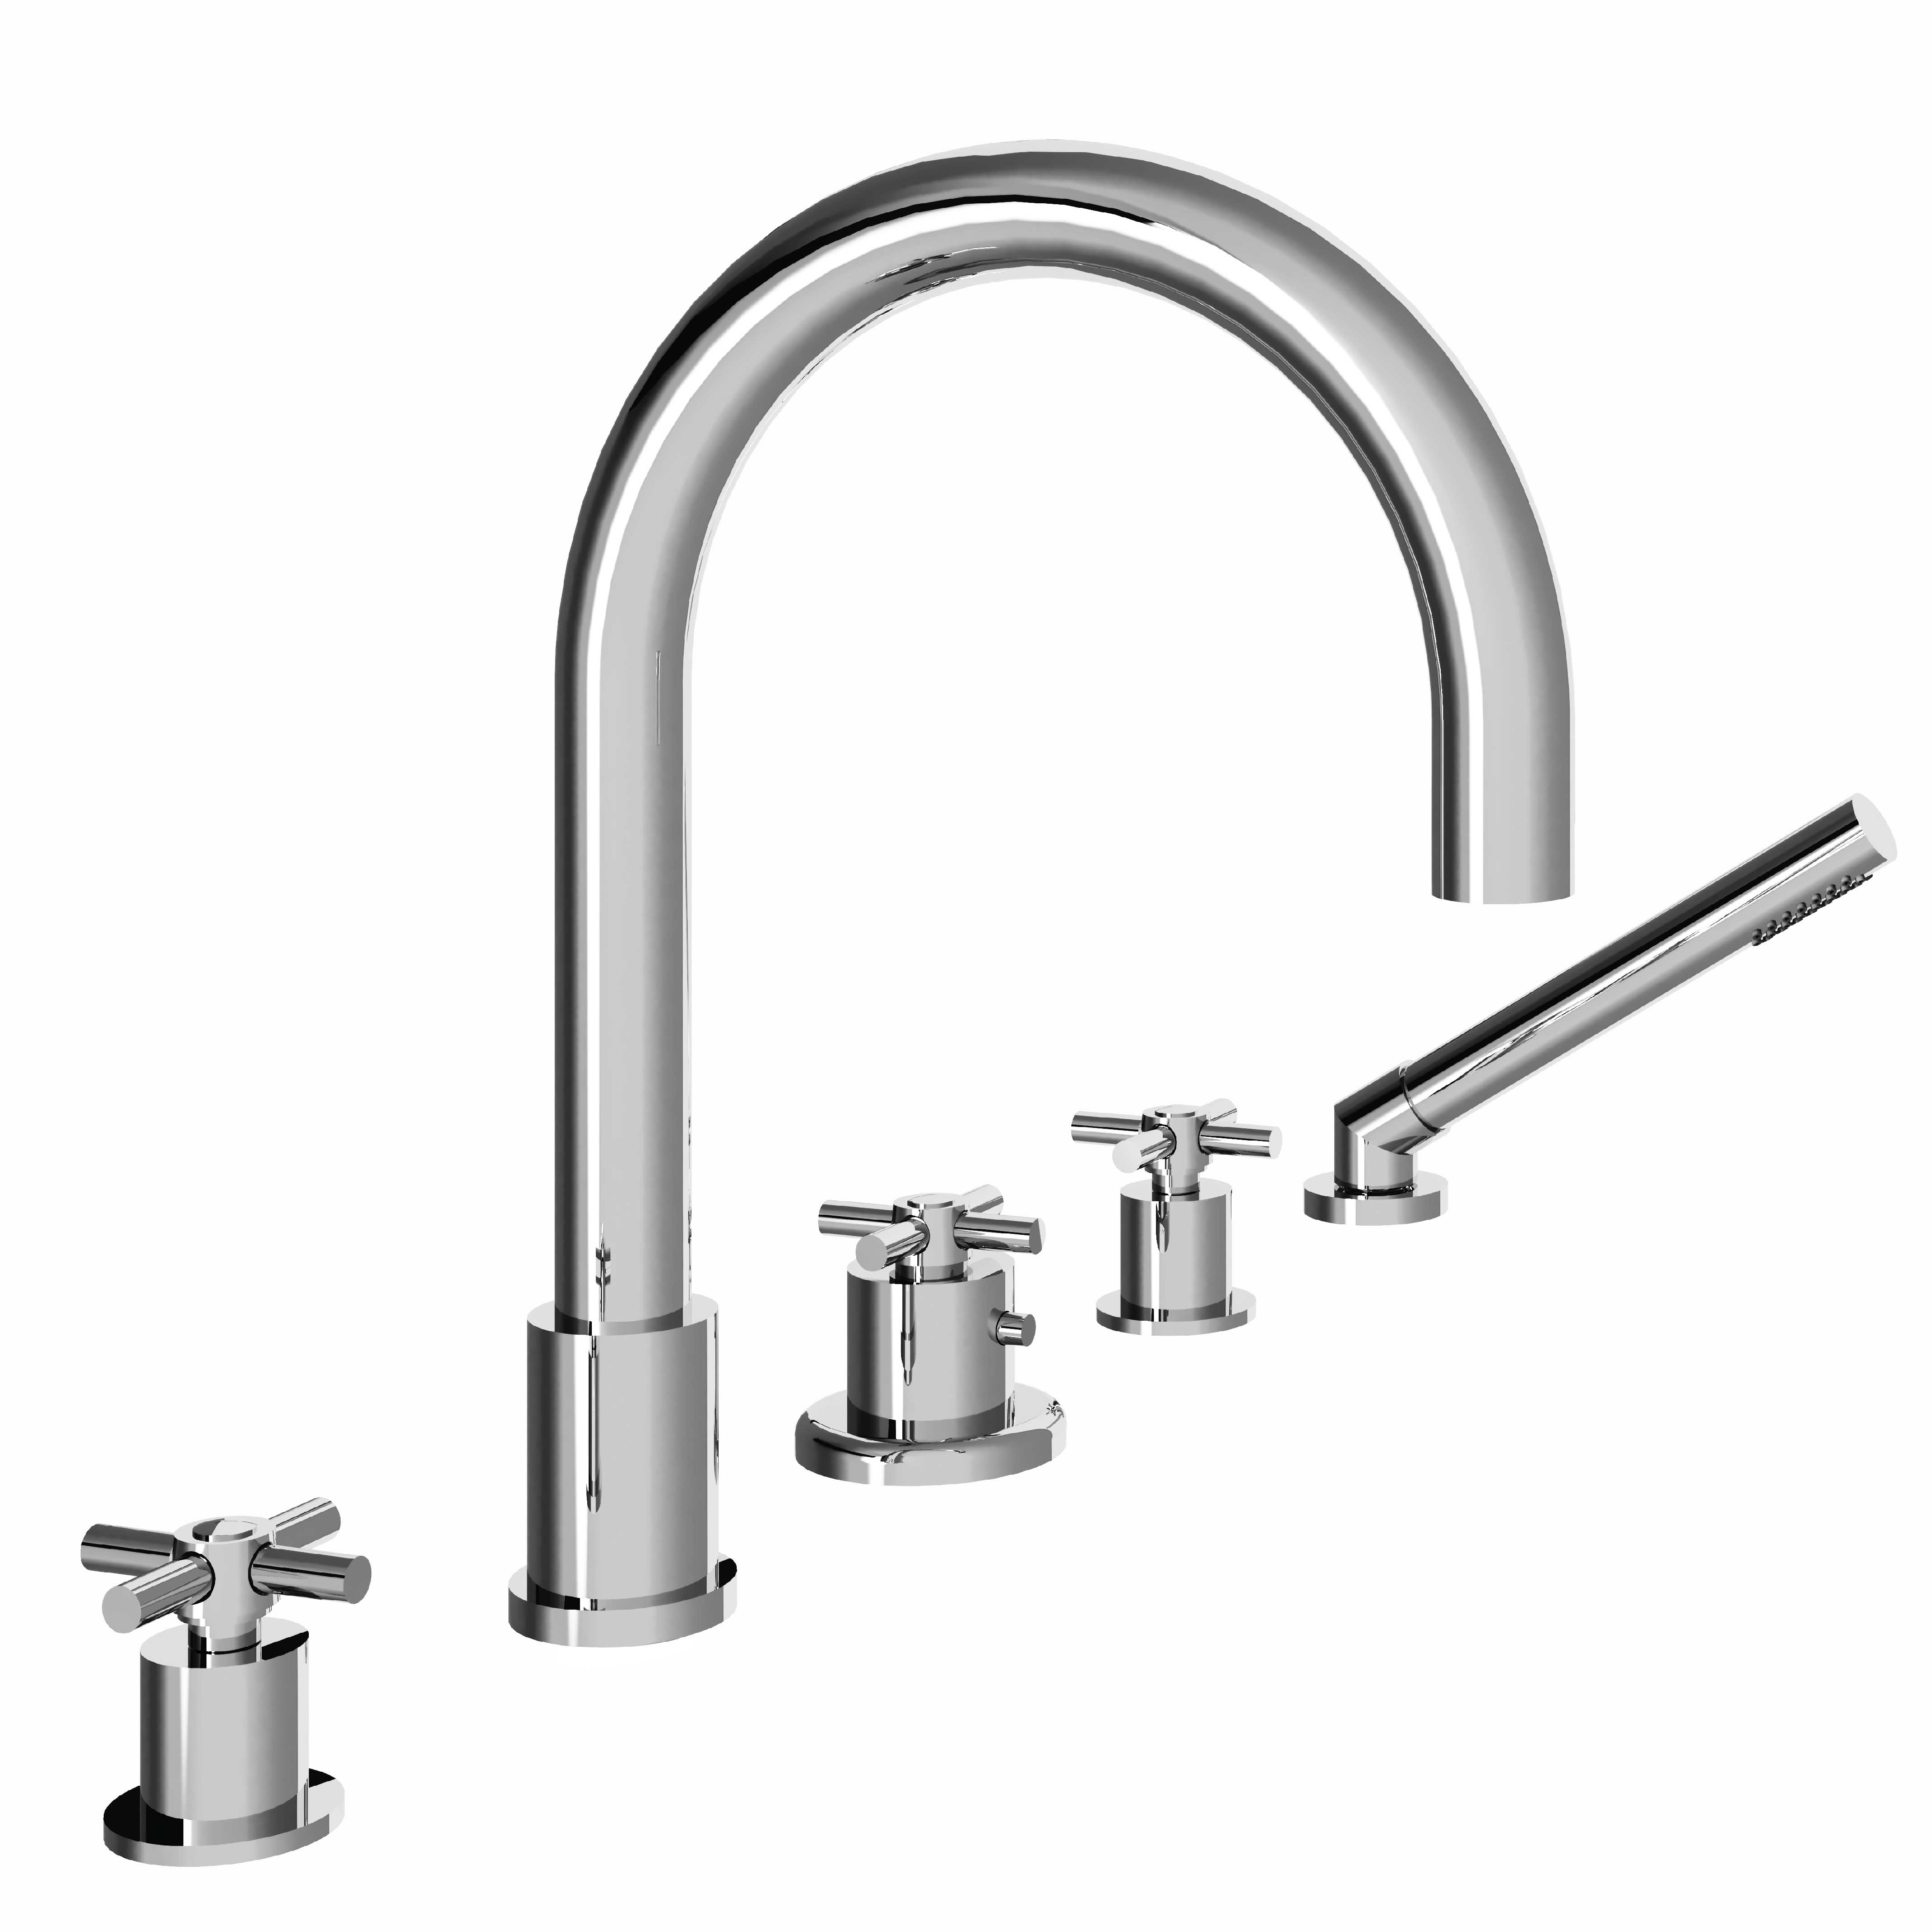 M90-3305T 5-hole bath and shower thermo. mixer